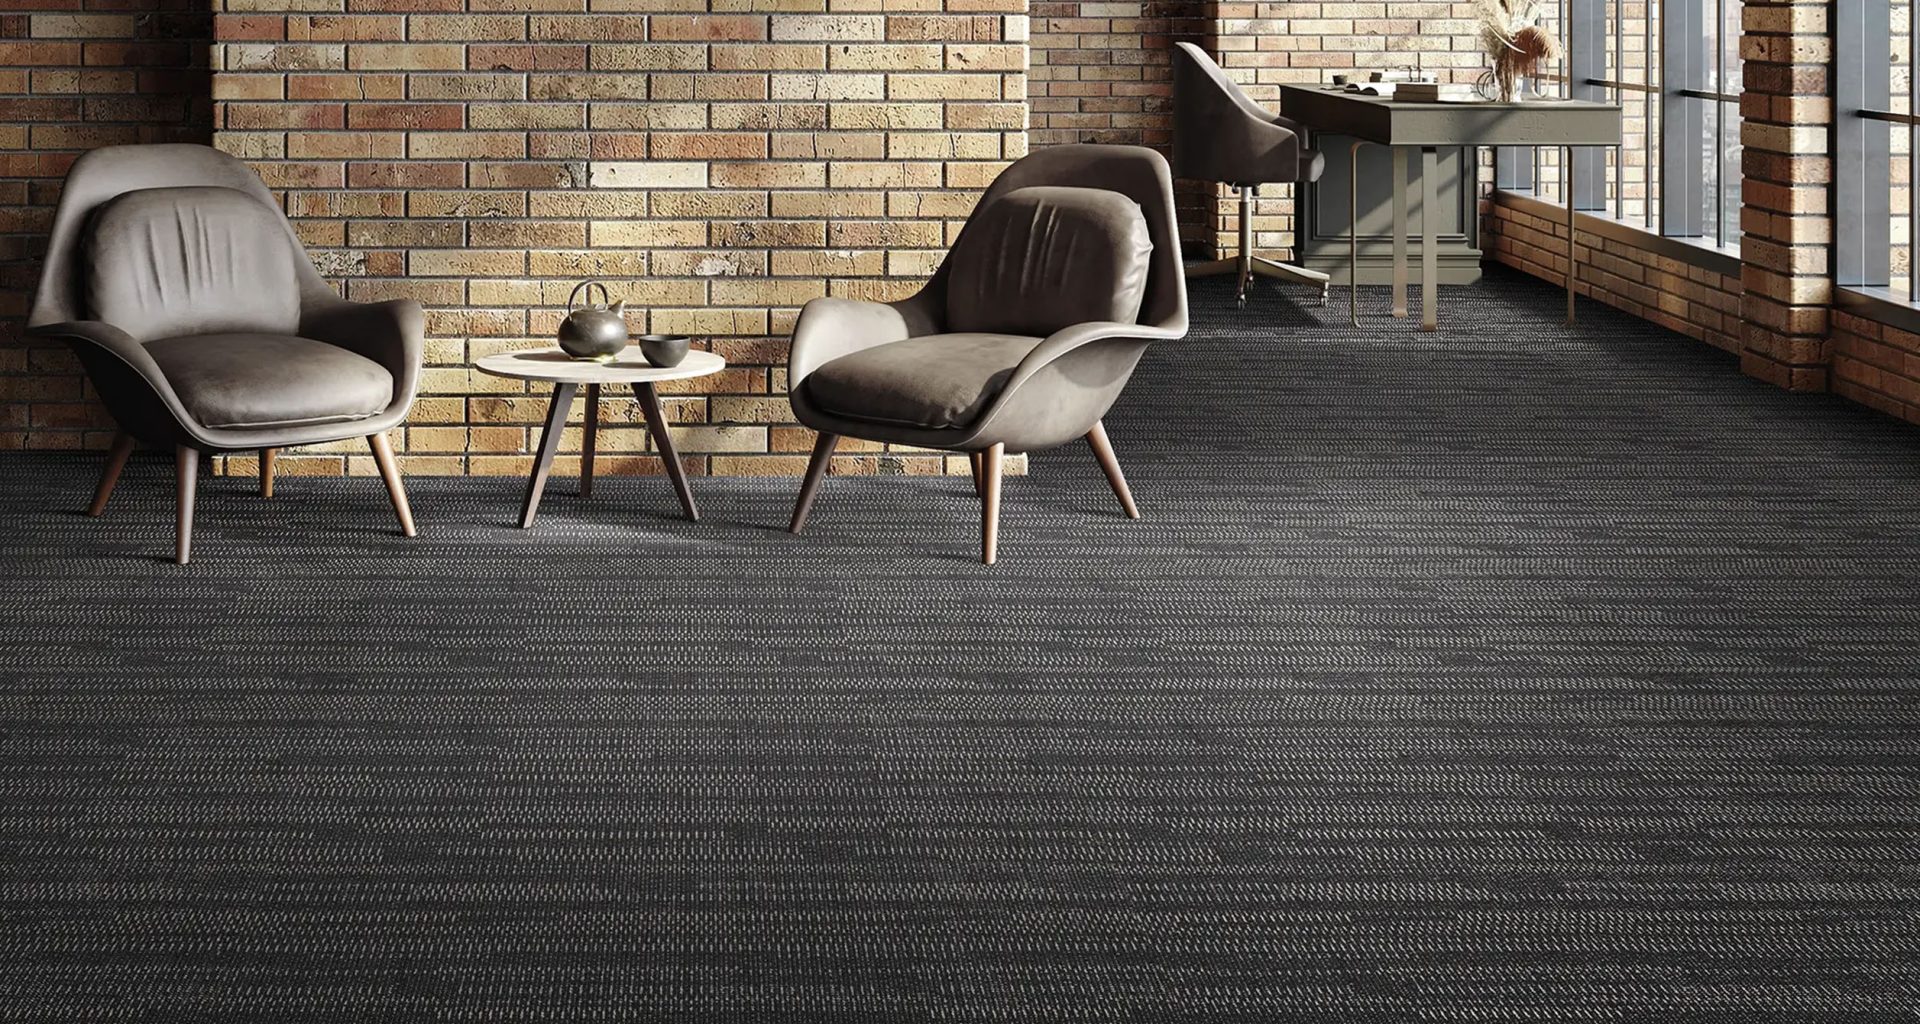 Commercial Carpet in an office setting